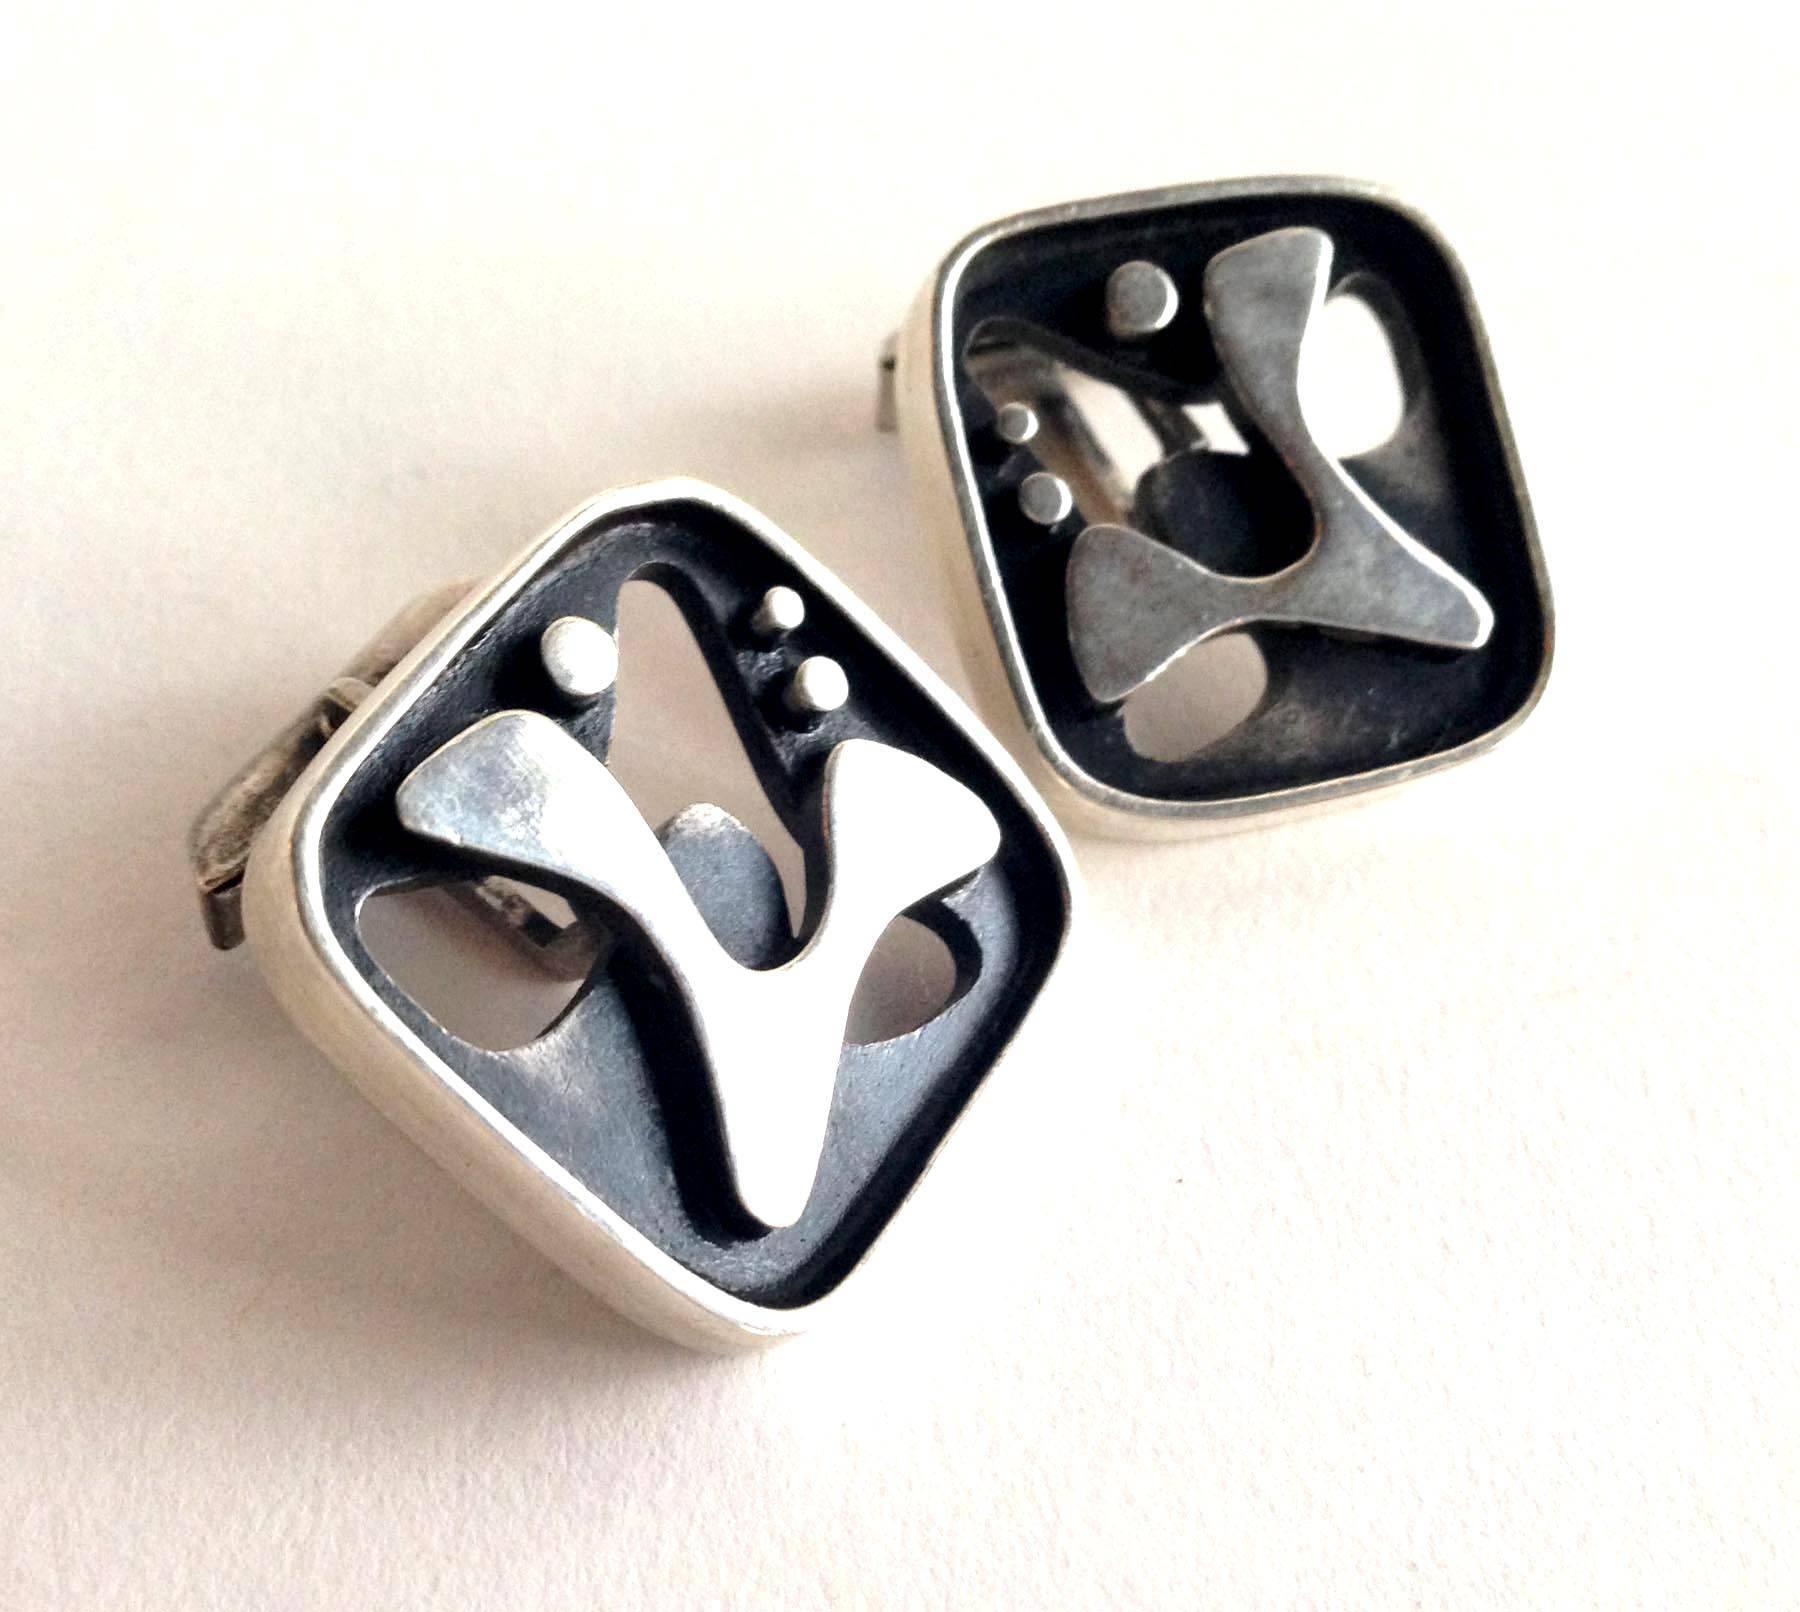 Abstract modern bi-level, shadowbox cufflinks by California modernist jeweler, Everett MacDonald of Laguna.  These cufflinks are a rare example of MacDonald's work and date from the 1950's.  Measuring 1